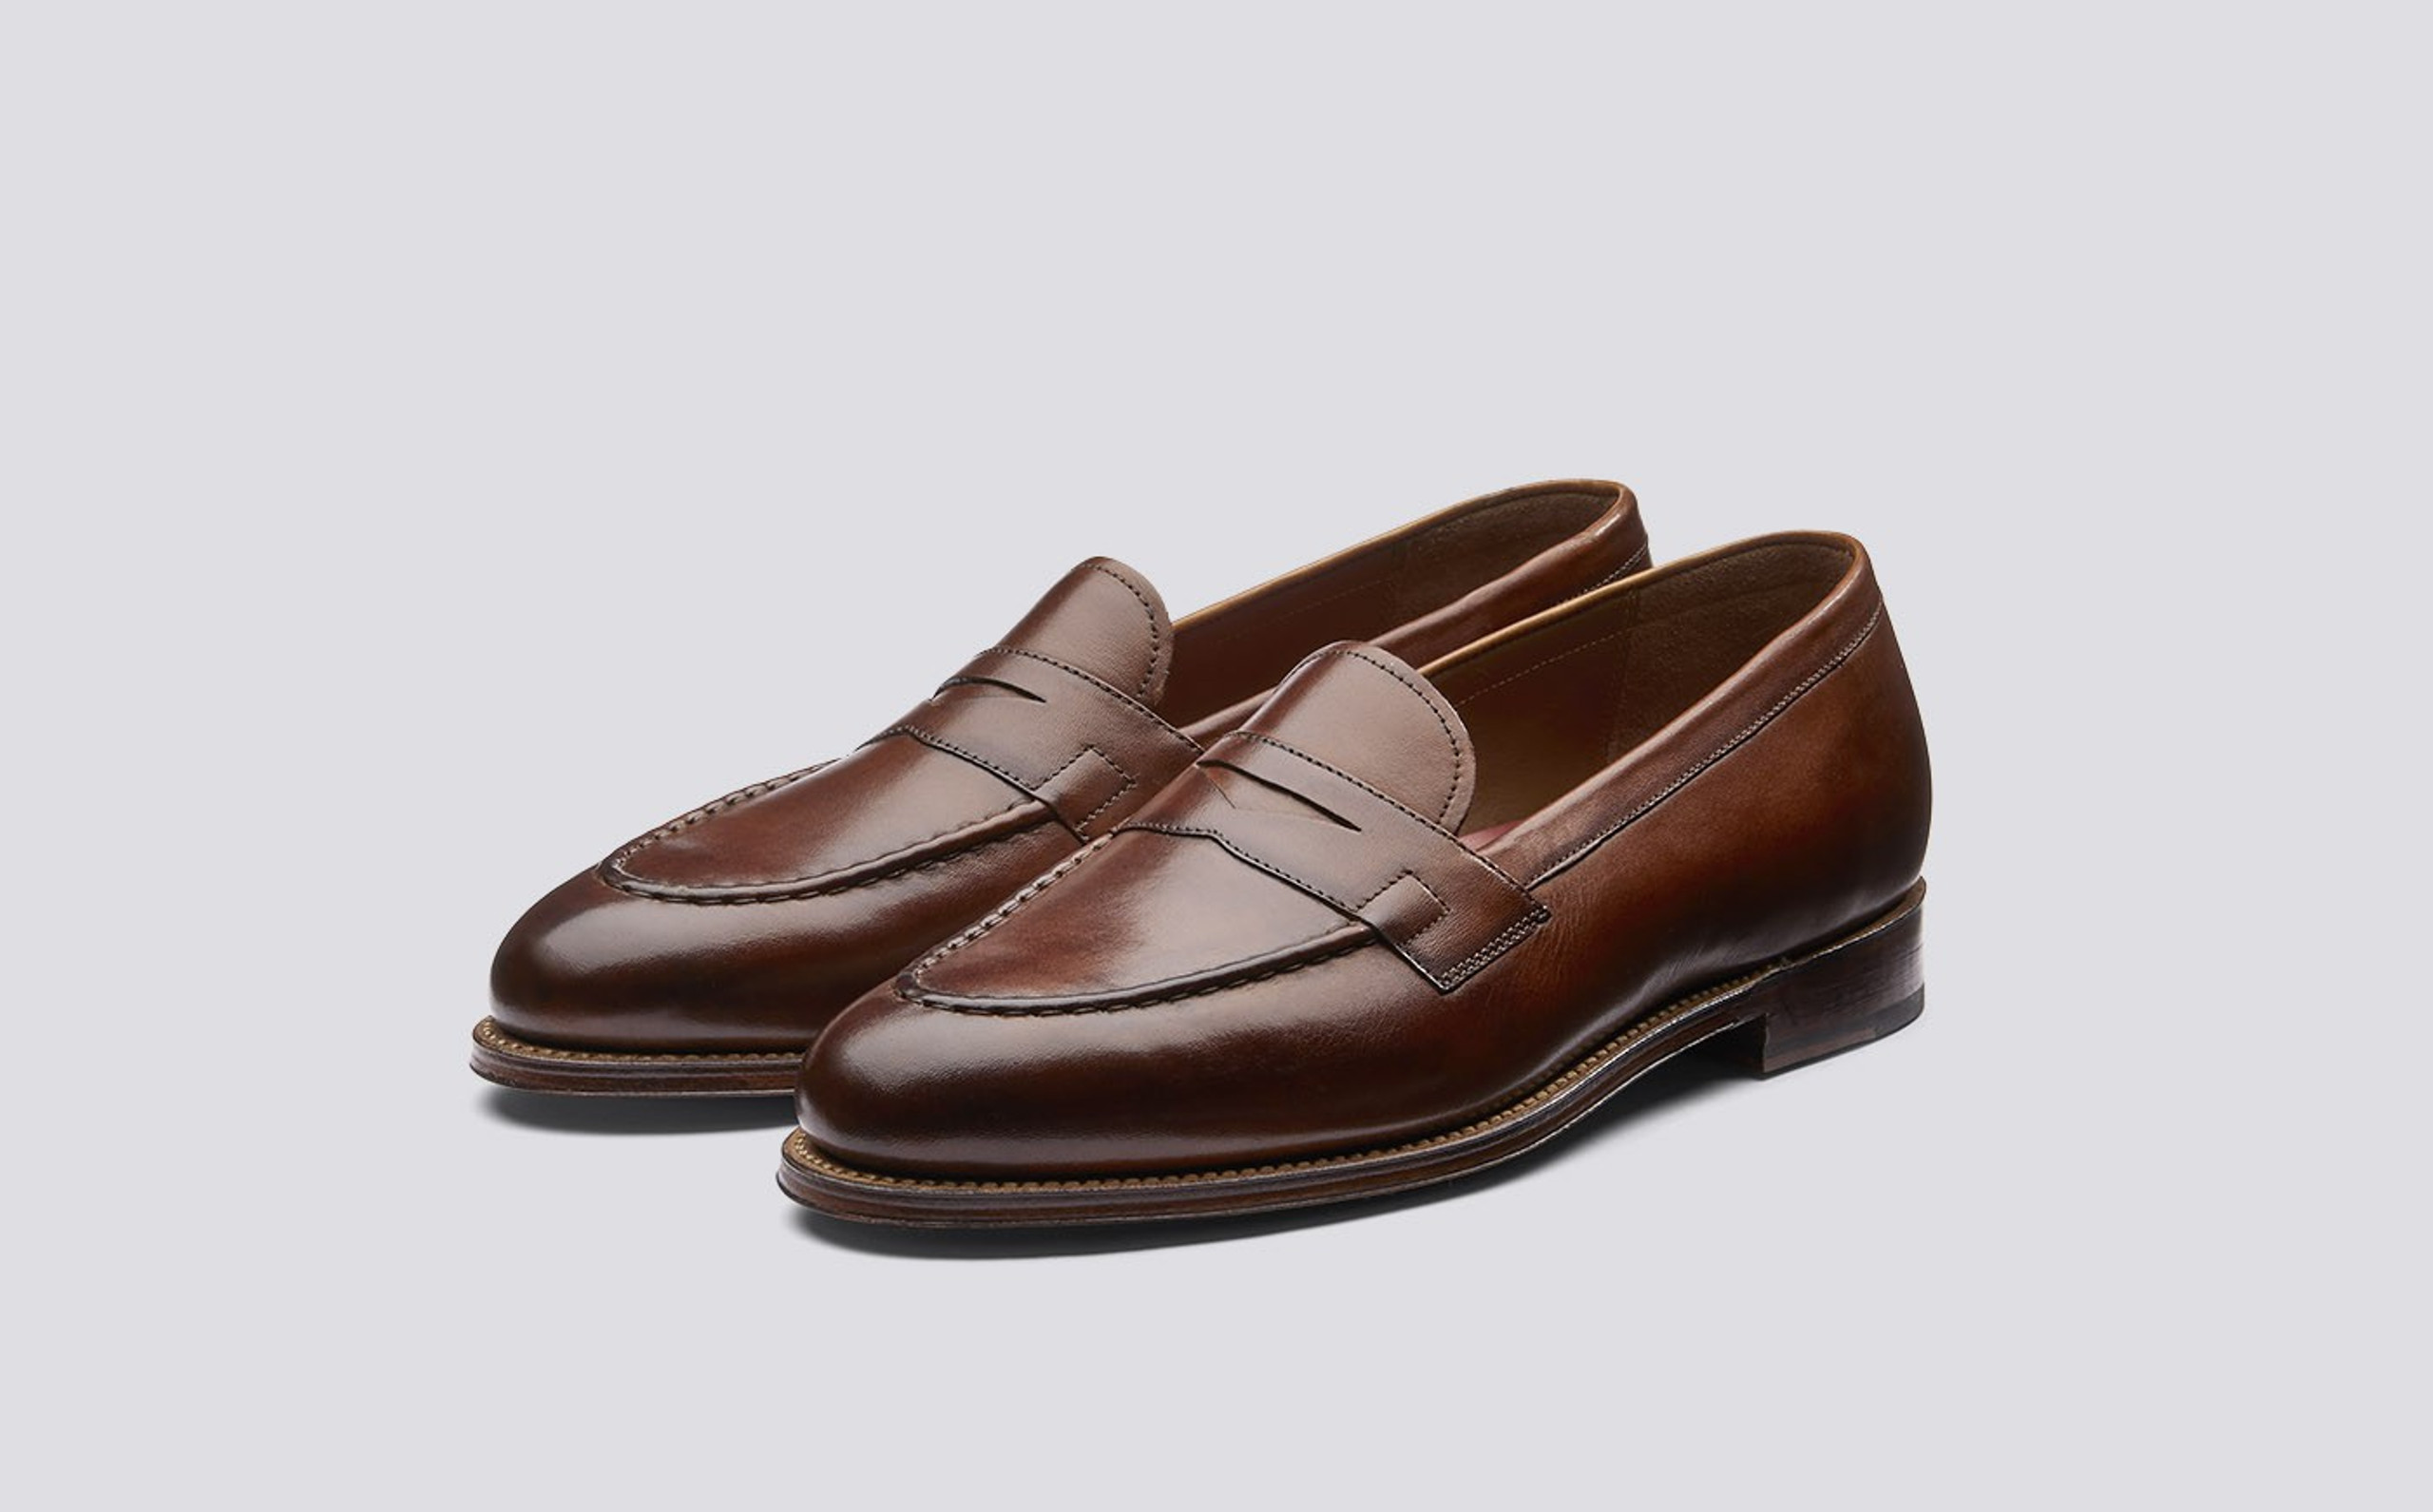 Lloyd | Mens Loafers in Tan Handpainted Leather | Grenson Shoes